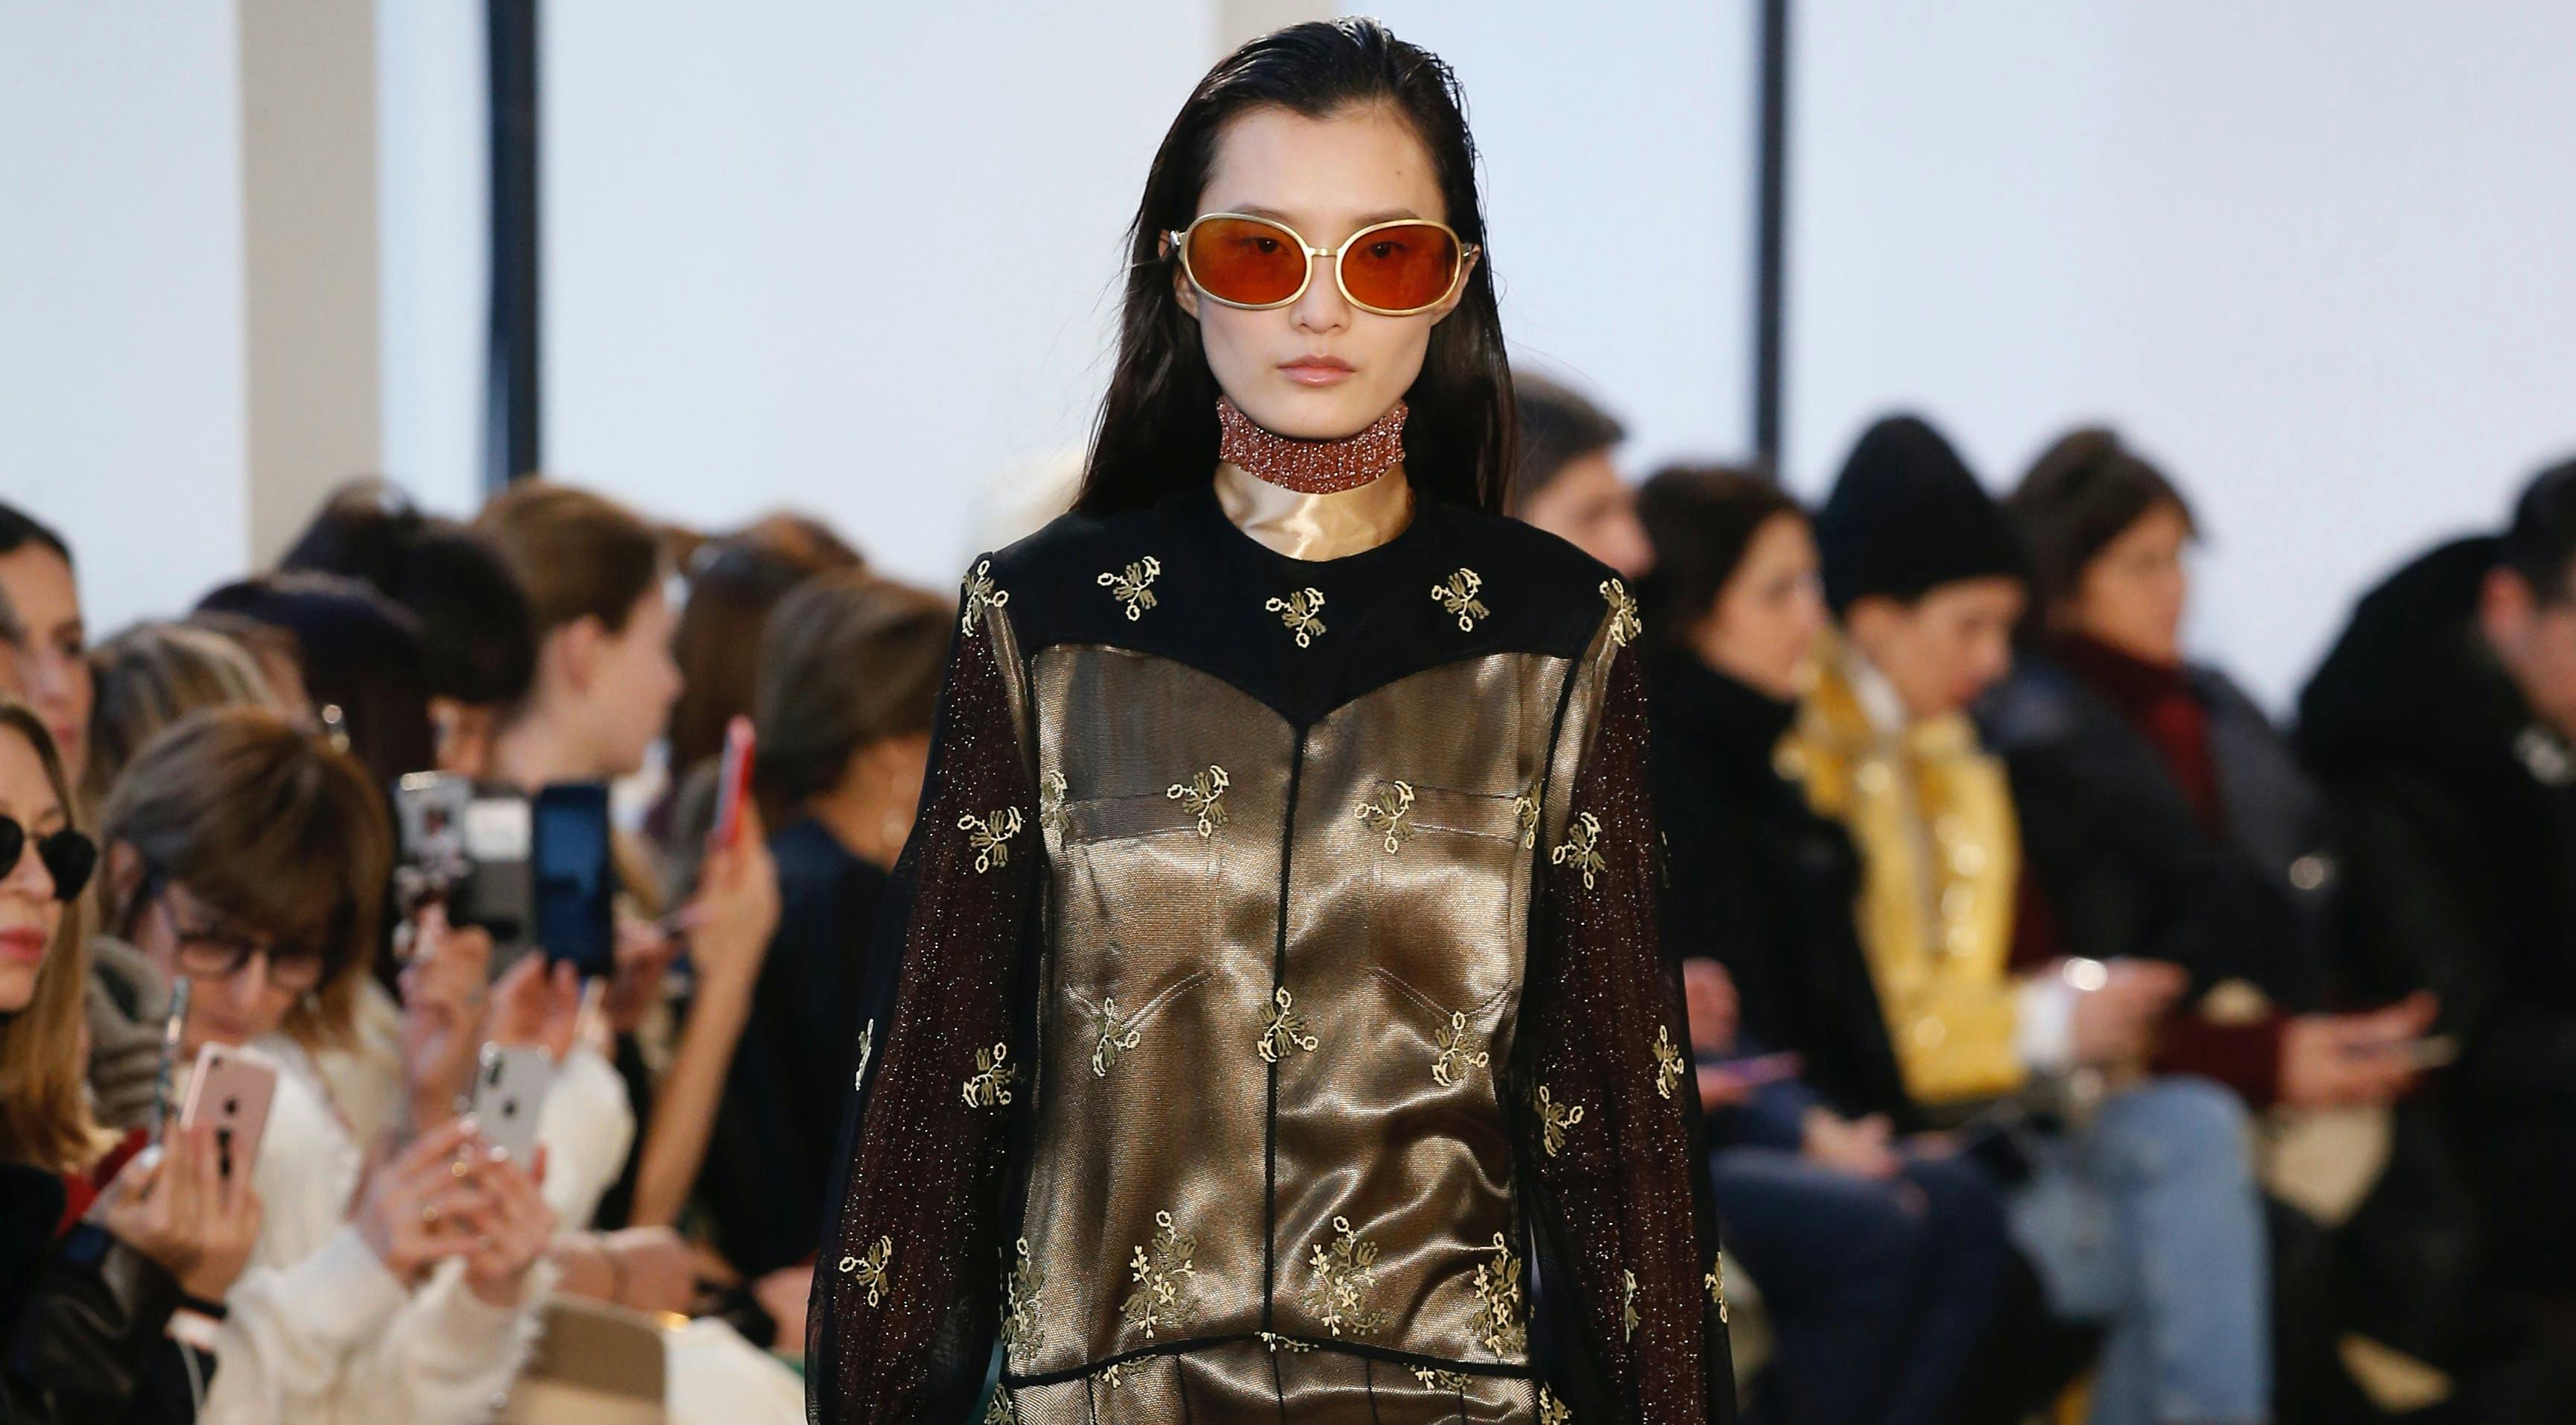 chloé _ ready to wear fall winter 2018 -19 paris february march 2018 sunglasses accessories accessory person human clothing apparel sleeve long sleeve fashion